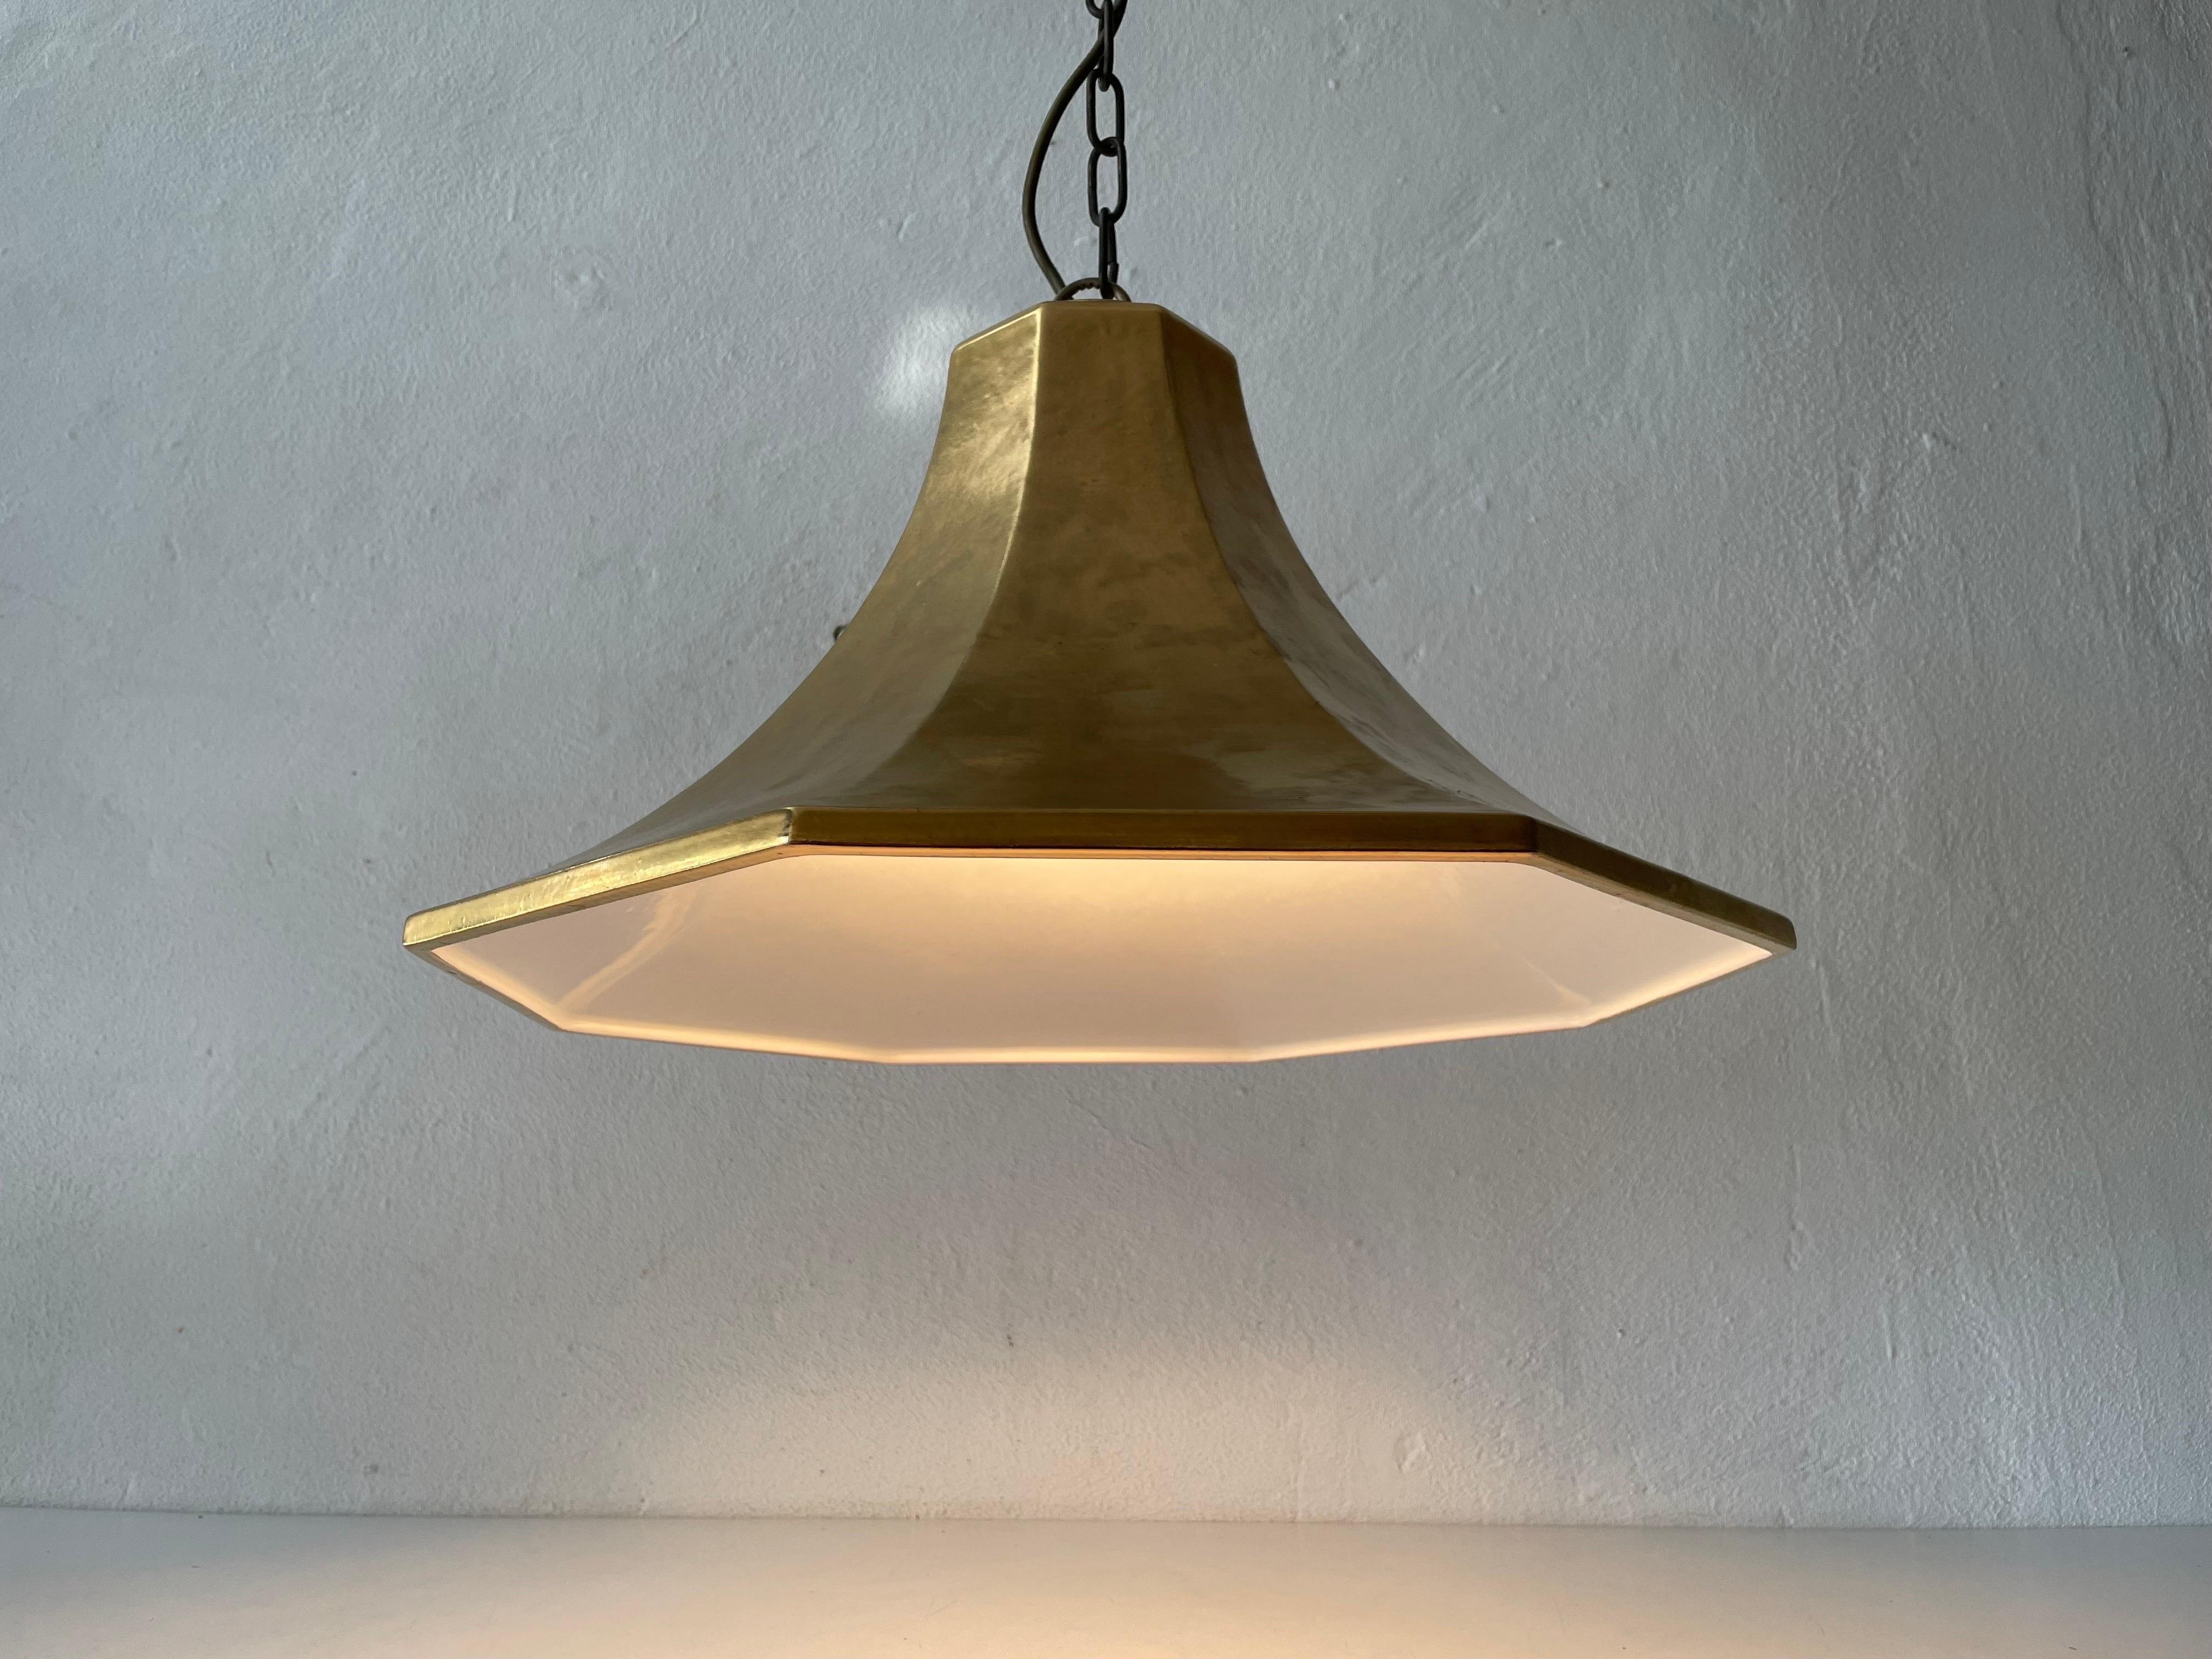 Exclusive Gold Ceramic Pendant Lamp by Licht+Wohnen, Karlsruhe, 1970s, Germany For Sale 4